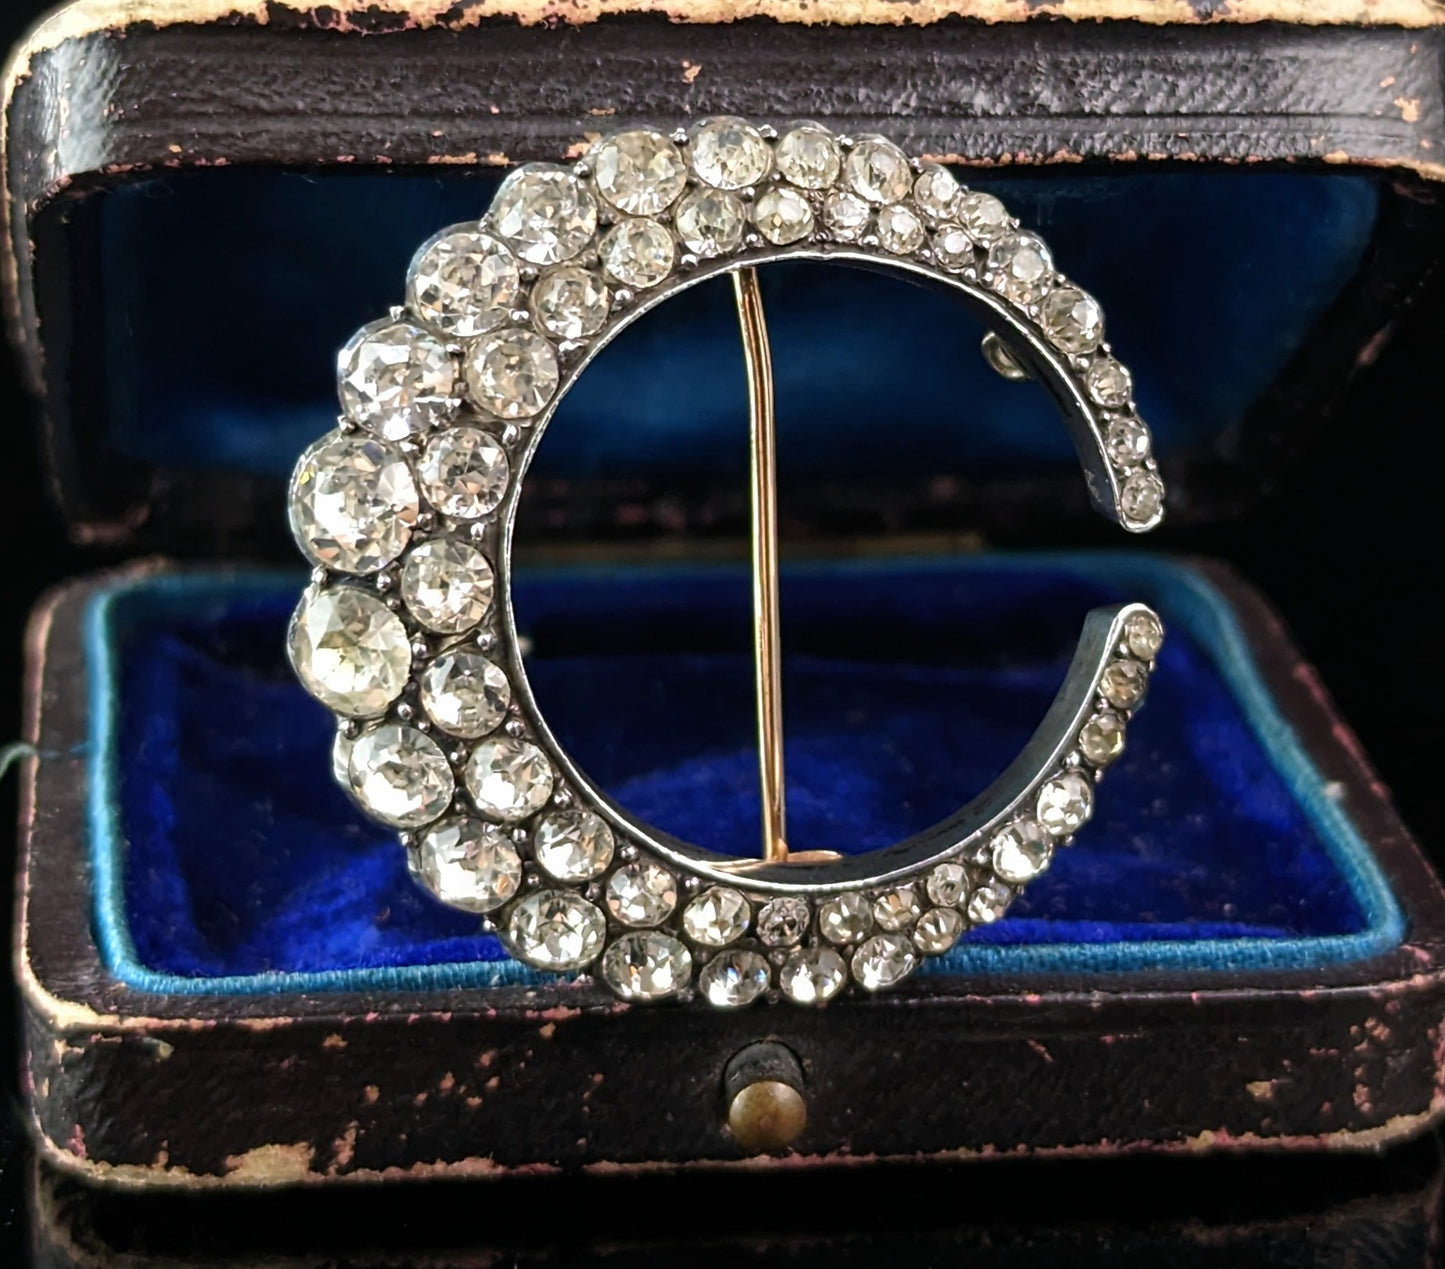 Antique Paste Crescent moon brooch, 9k gold and silver